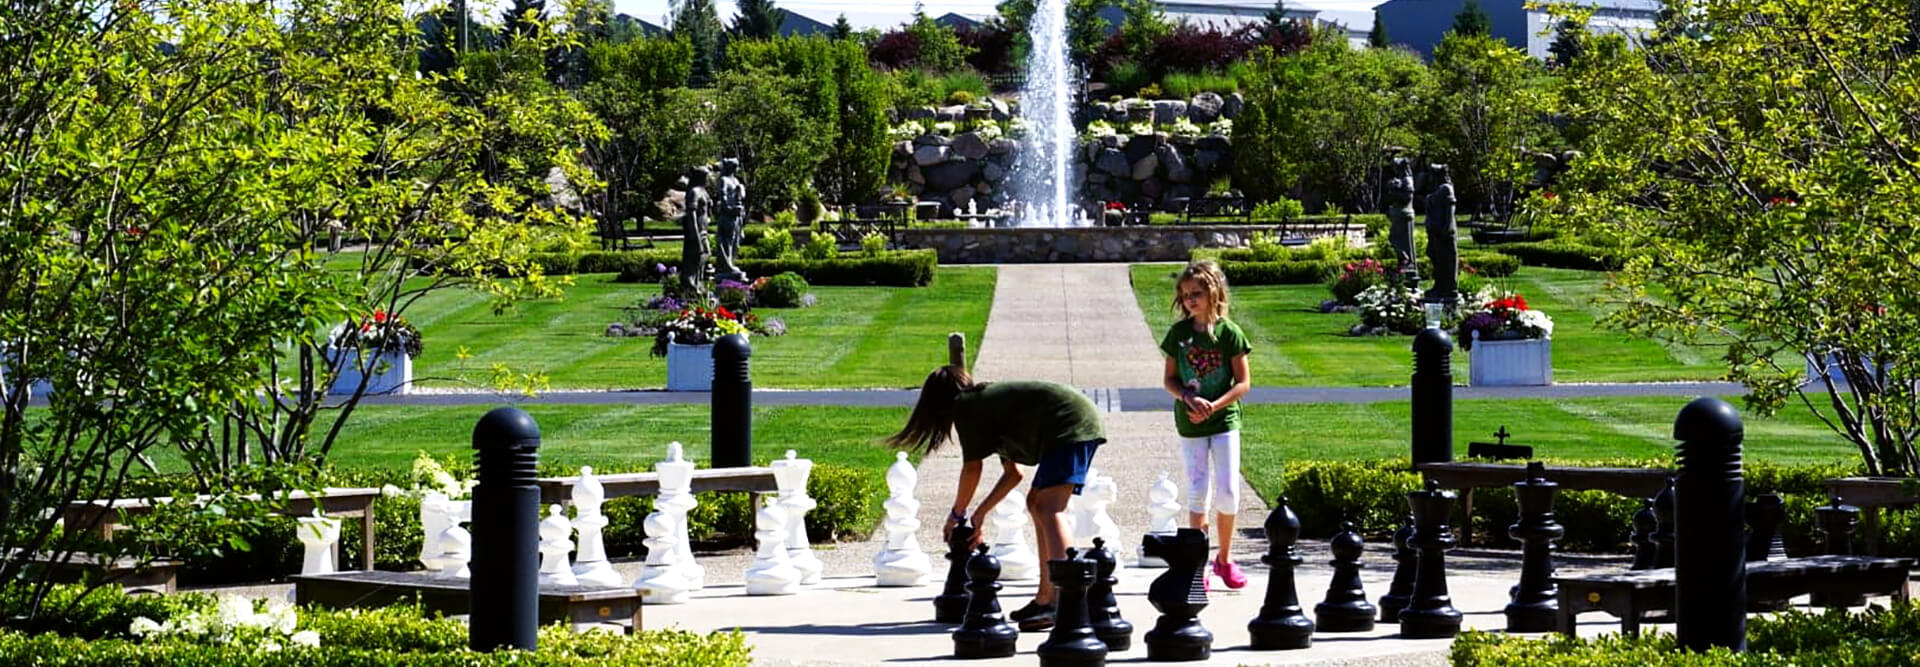 children playing a large chessboard